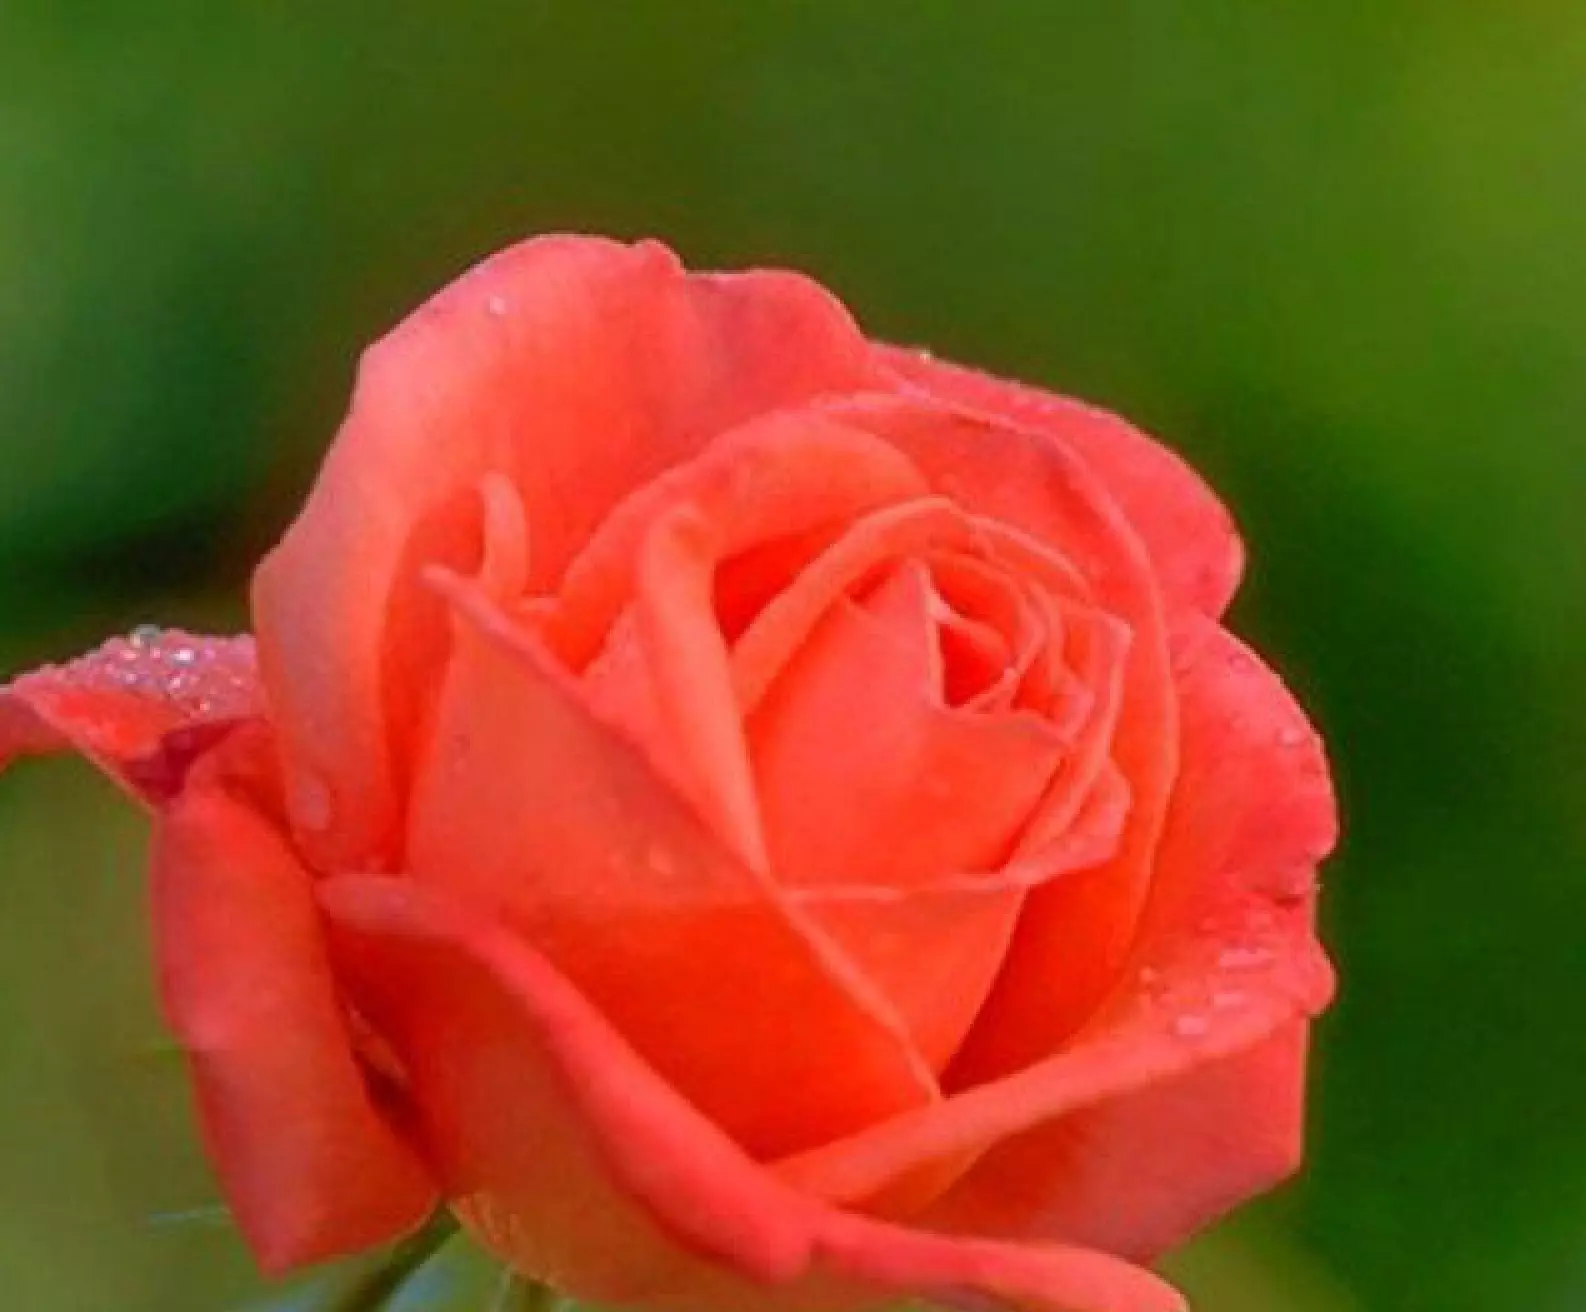 20 SEEDS for CLASSIC CORAL ORANGE RED Rose flower - $13.67